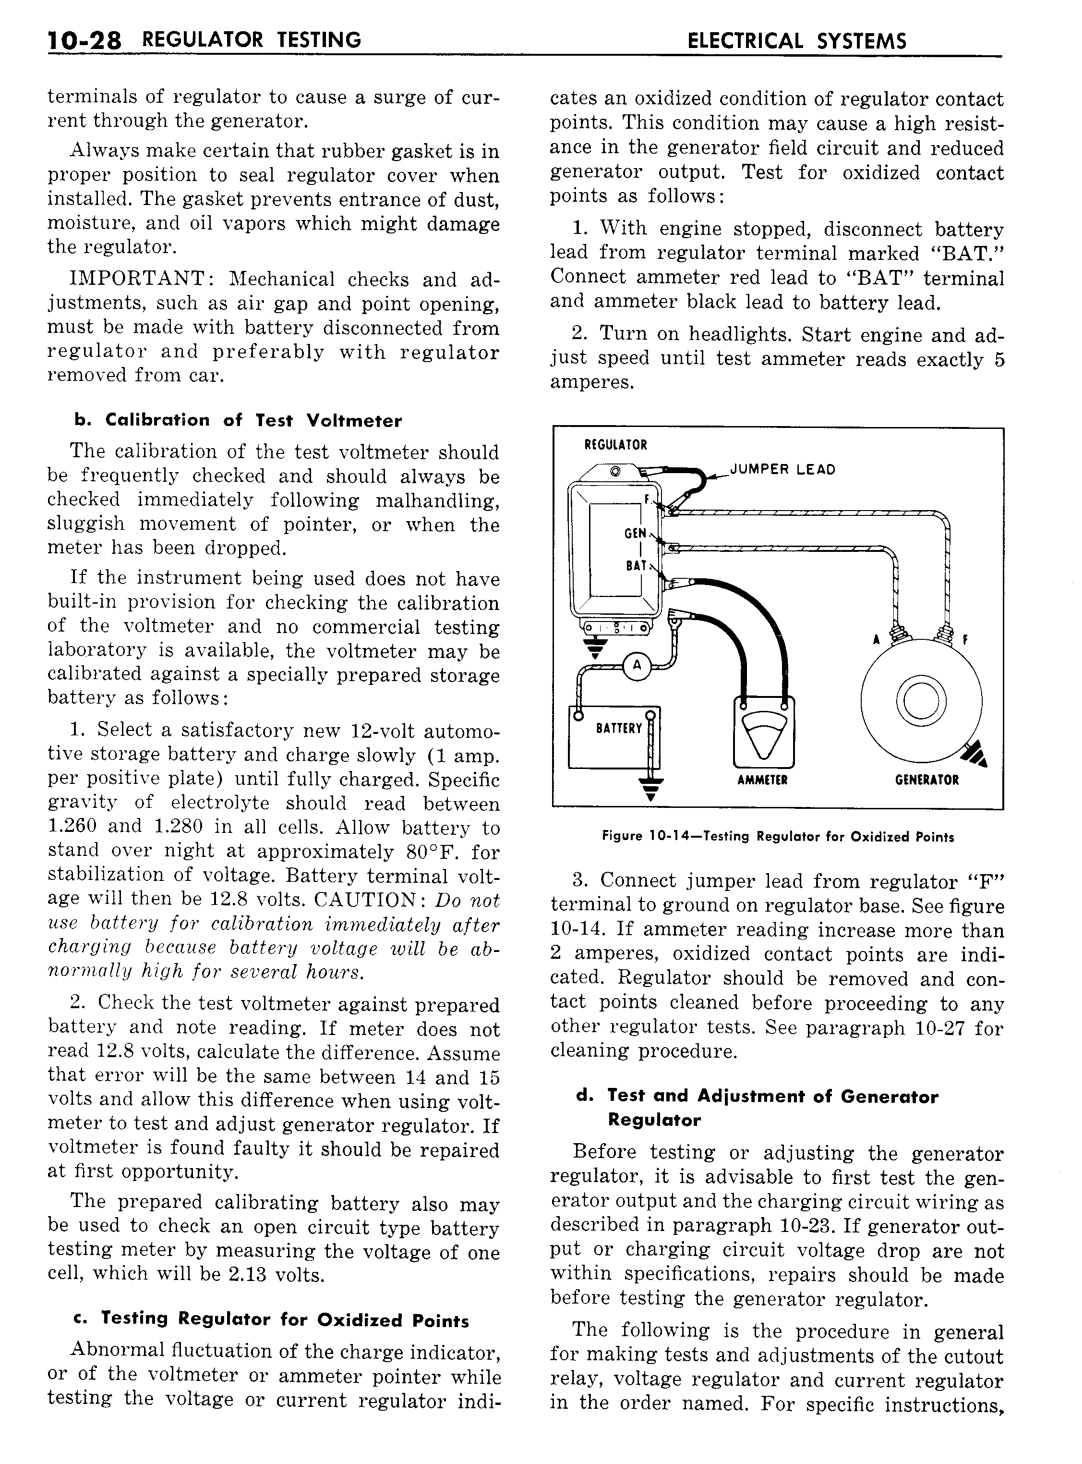 n_11 1957 Buick Shop Manual - Electrical Systems-028-028.jpg